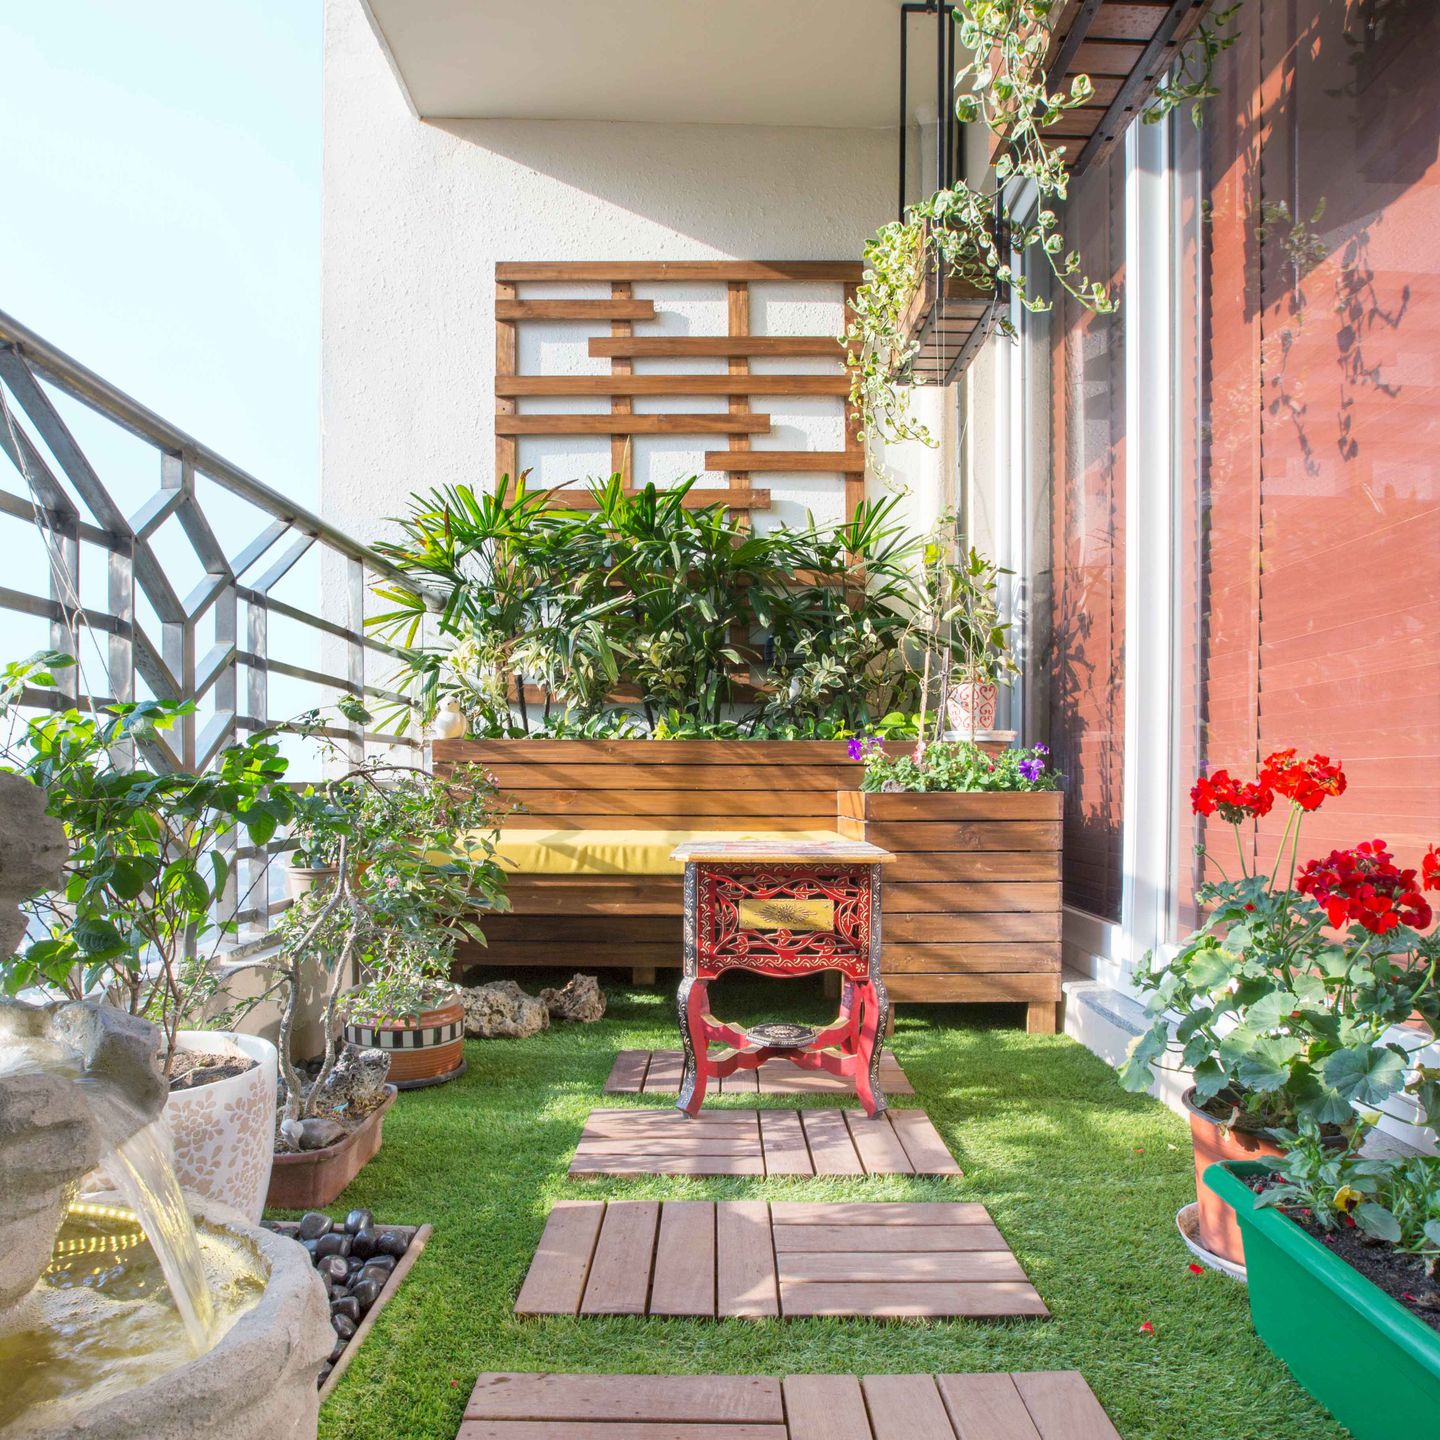 Modern Balcony Design with Wooden Grid Wall, Grass Mat, Wooden Bench, and Unique Wooden Planks - Livspace